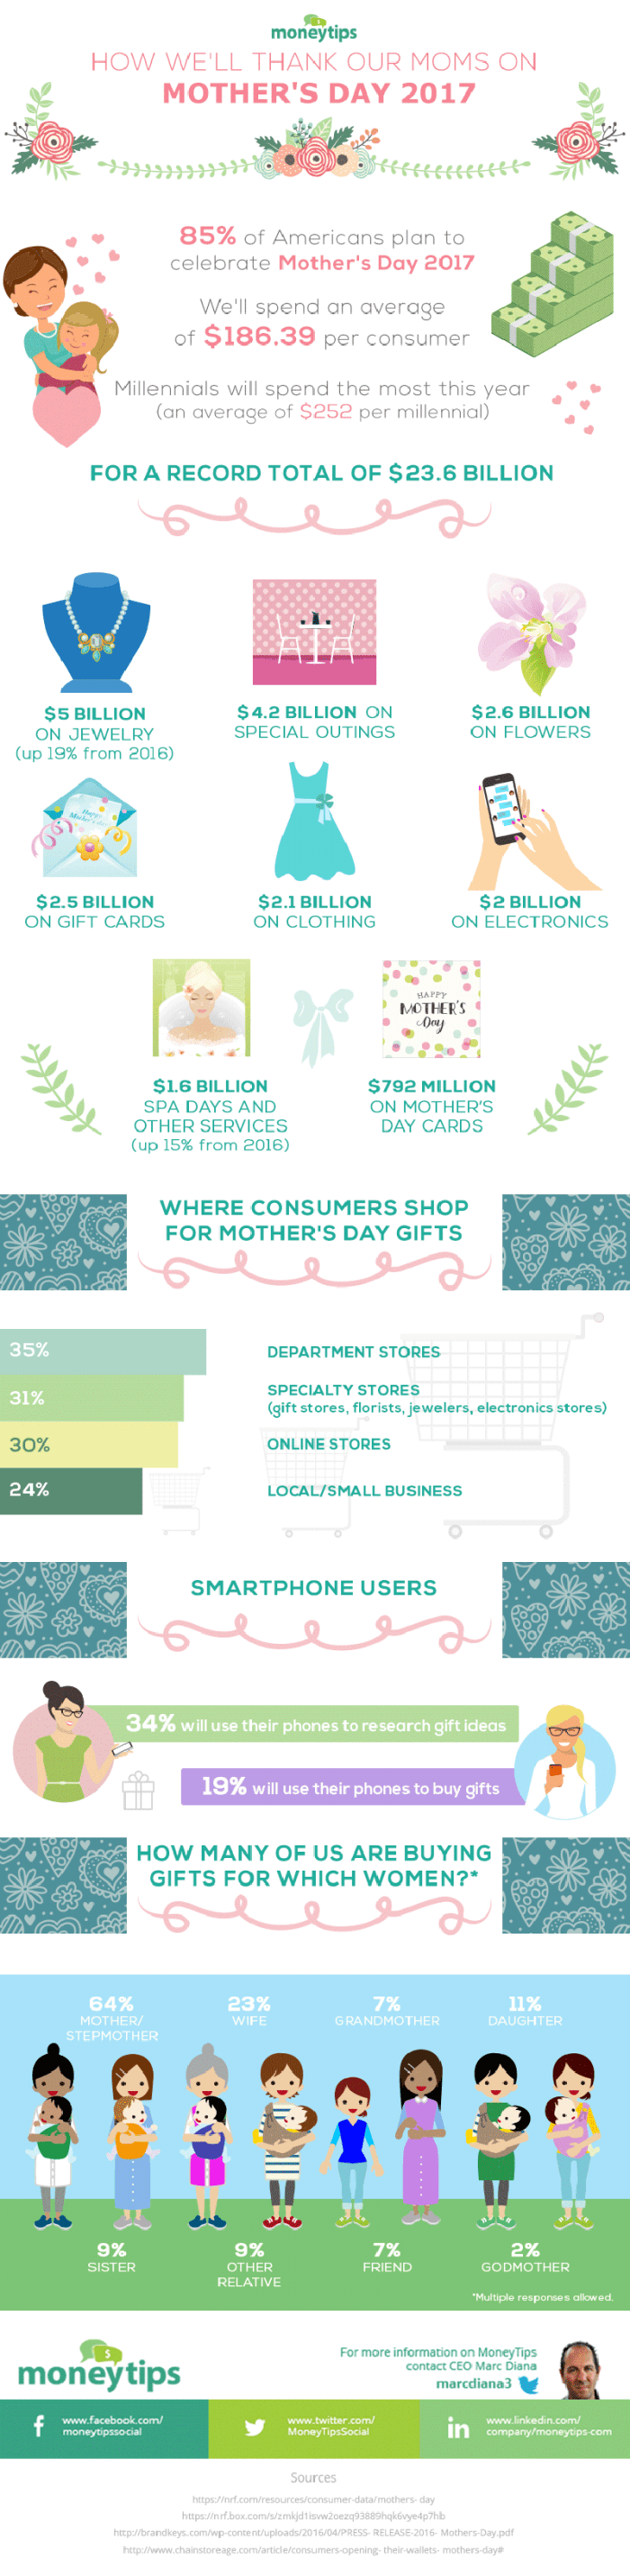 How Much We Spend On Our Moms On Mother's Day